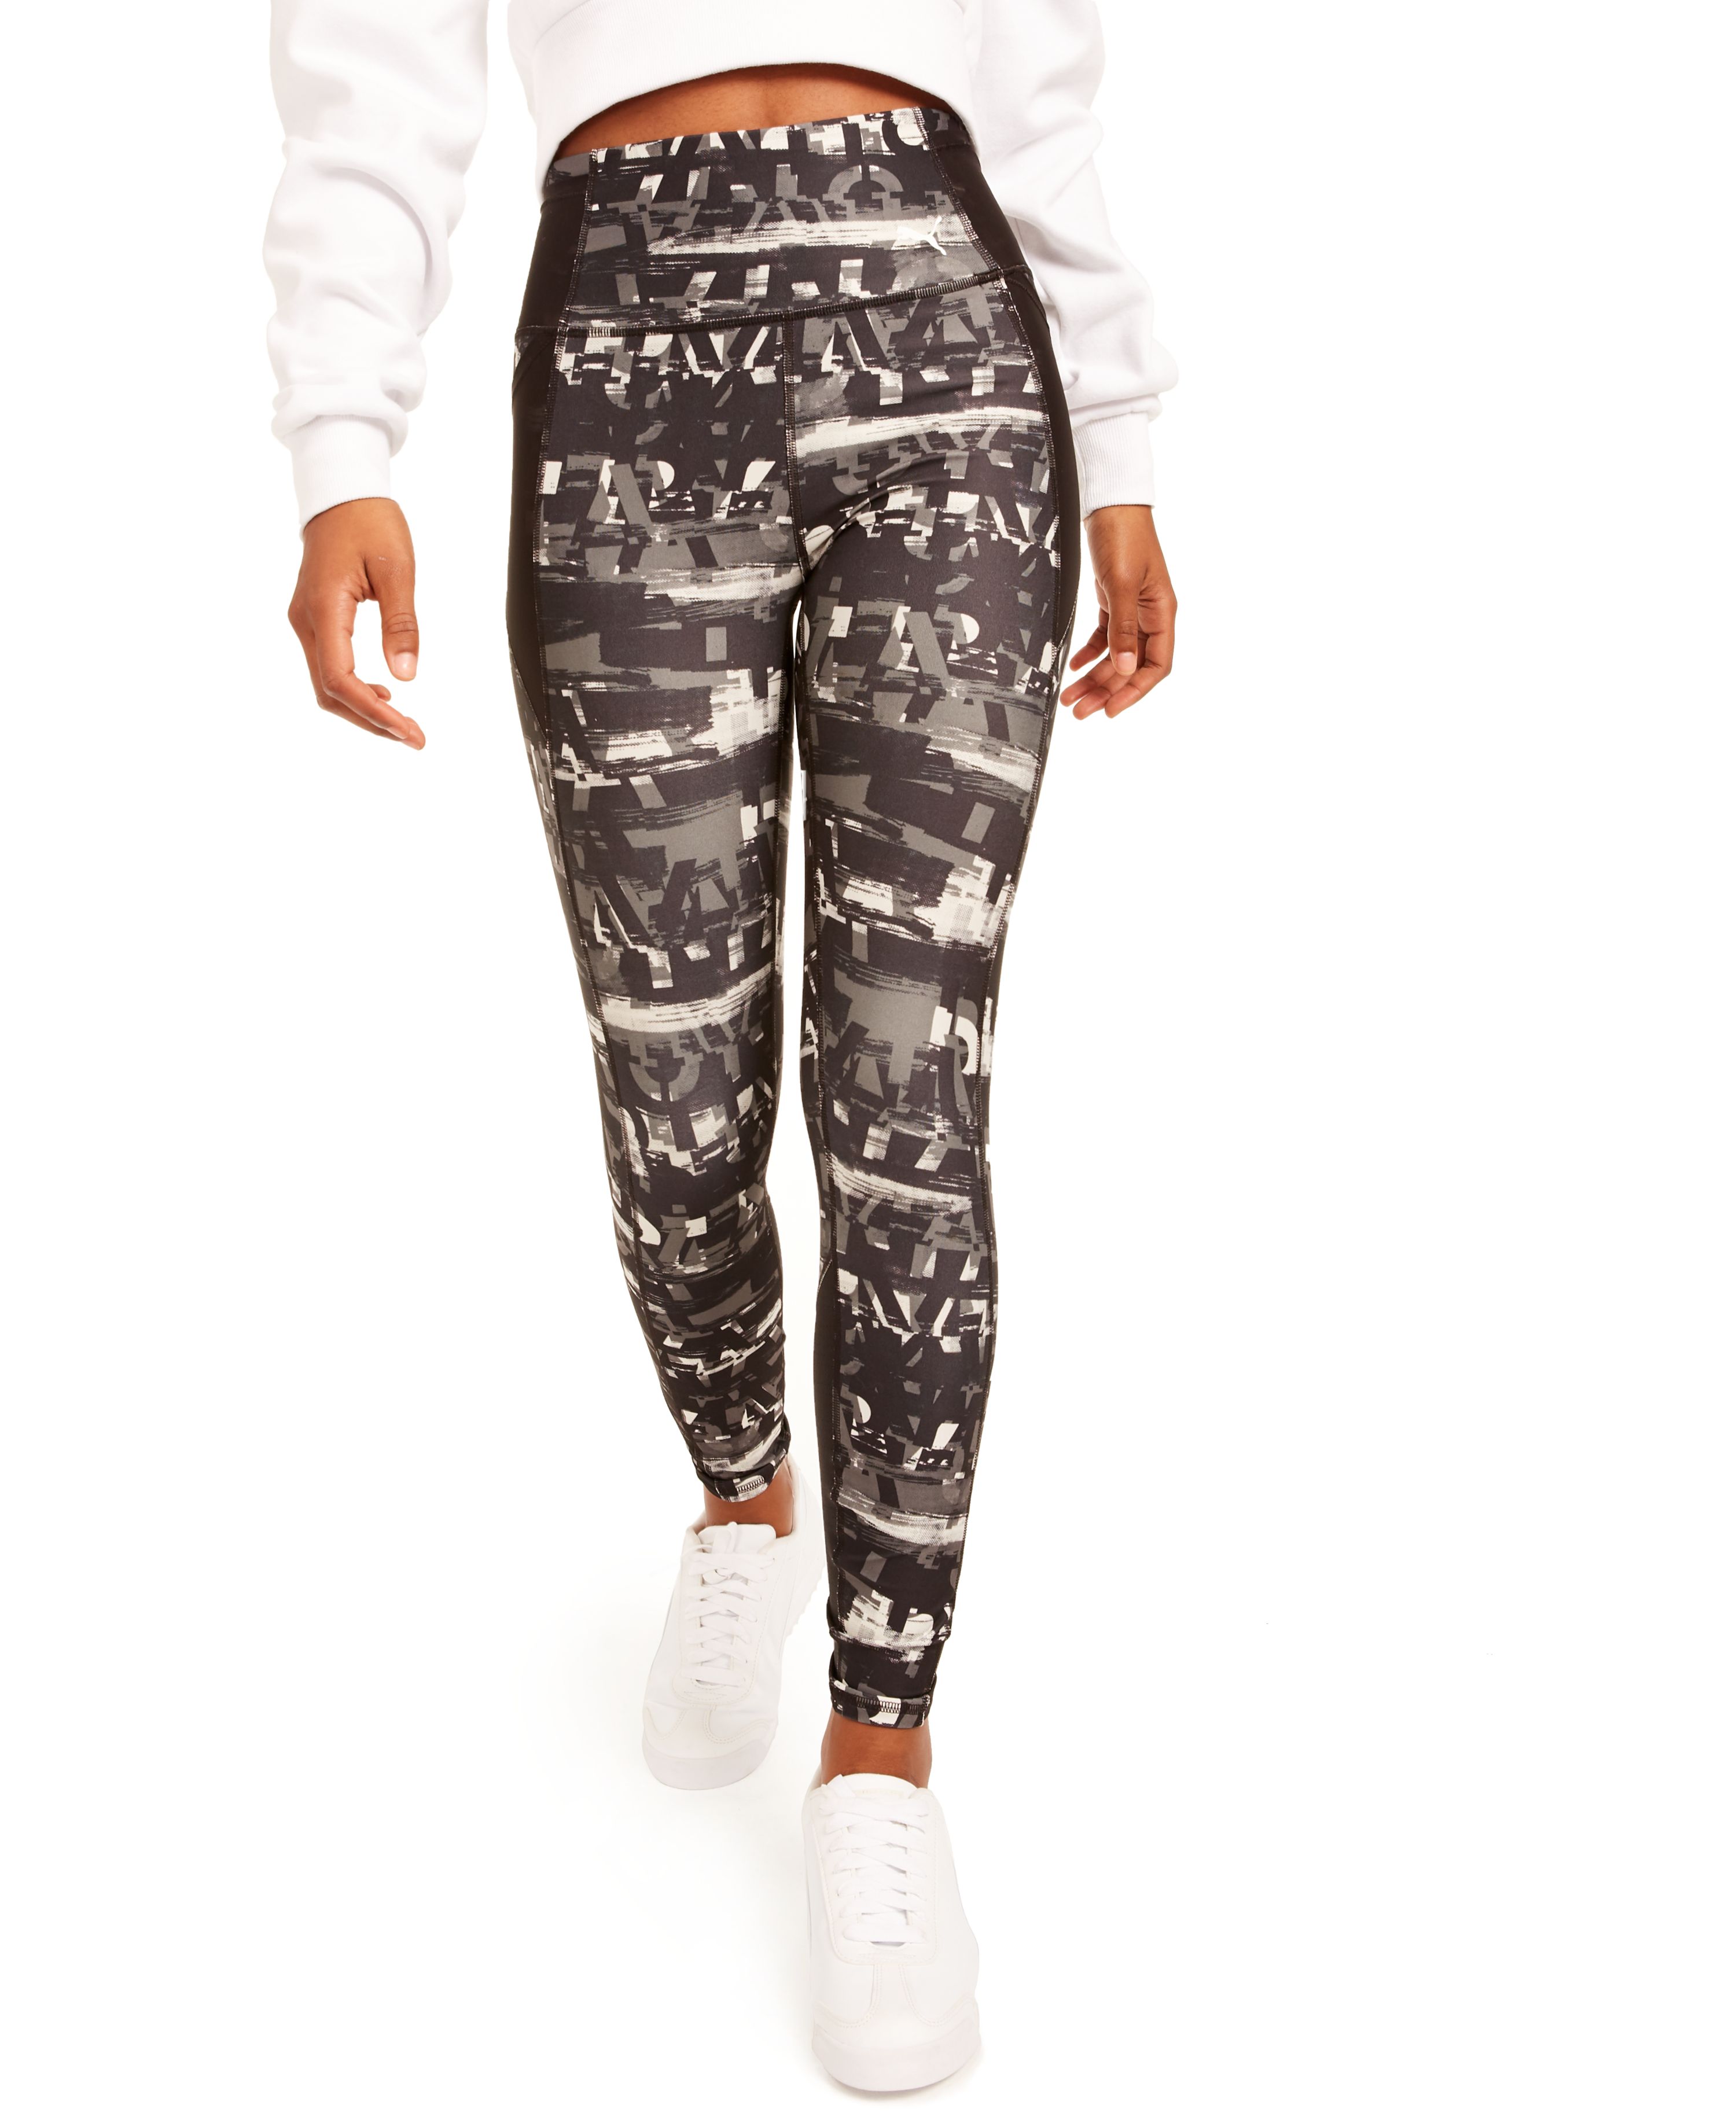 PUMA Womens Be Bold All Over Printed Tights - image 1 of 1